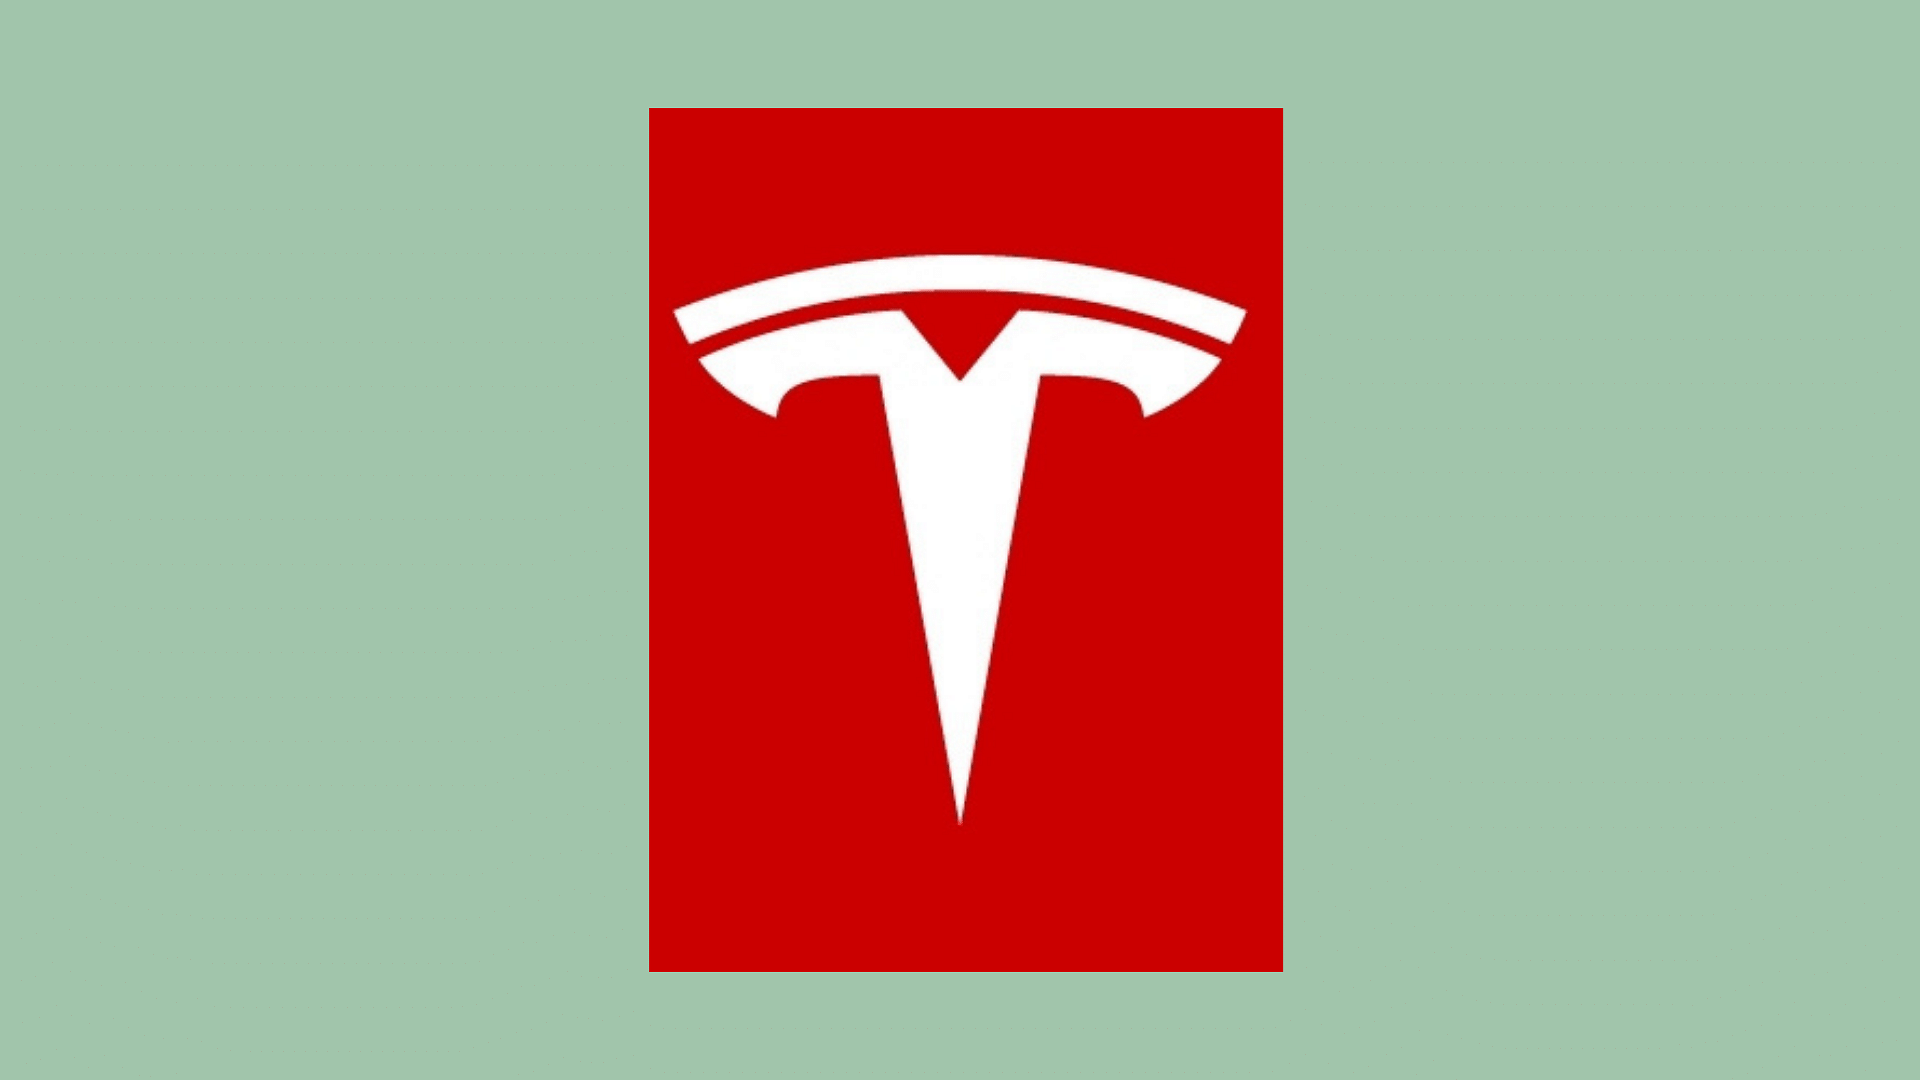 <div class="paragraphs"><p>The Indian government has turned down a demand of tech billionaire Elon Musk's electric vehicle (EV) company Tesla for tax breaks to import electric cars, saying rules already allow bringing in partially-built vehicles and assembling them locally at a lower levy, Bloomberg reported on Friday, 4 February.</p></div>